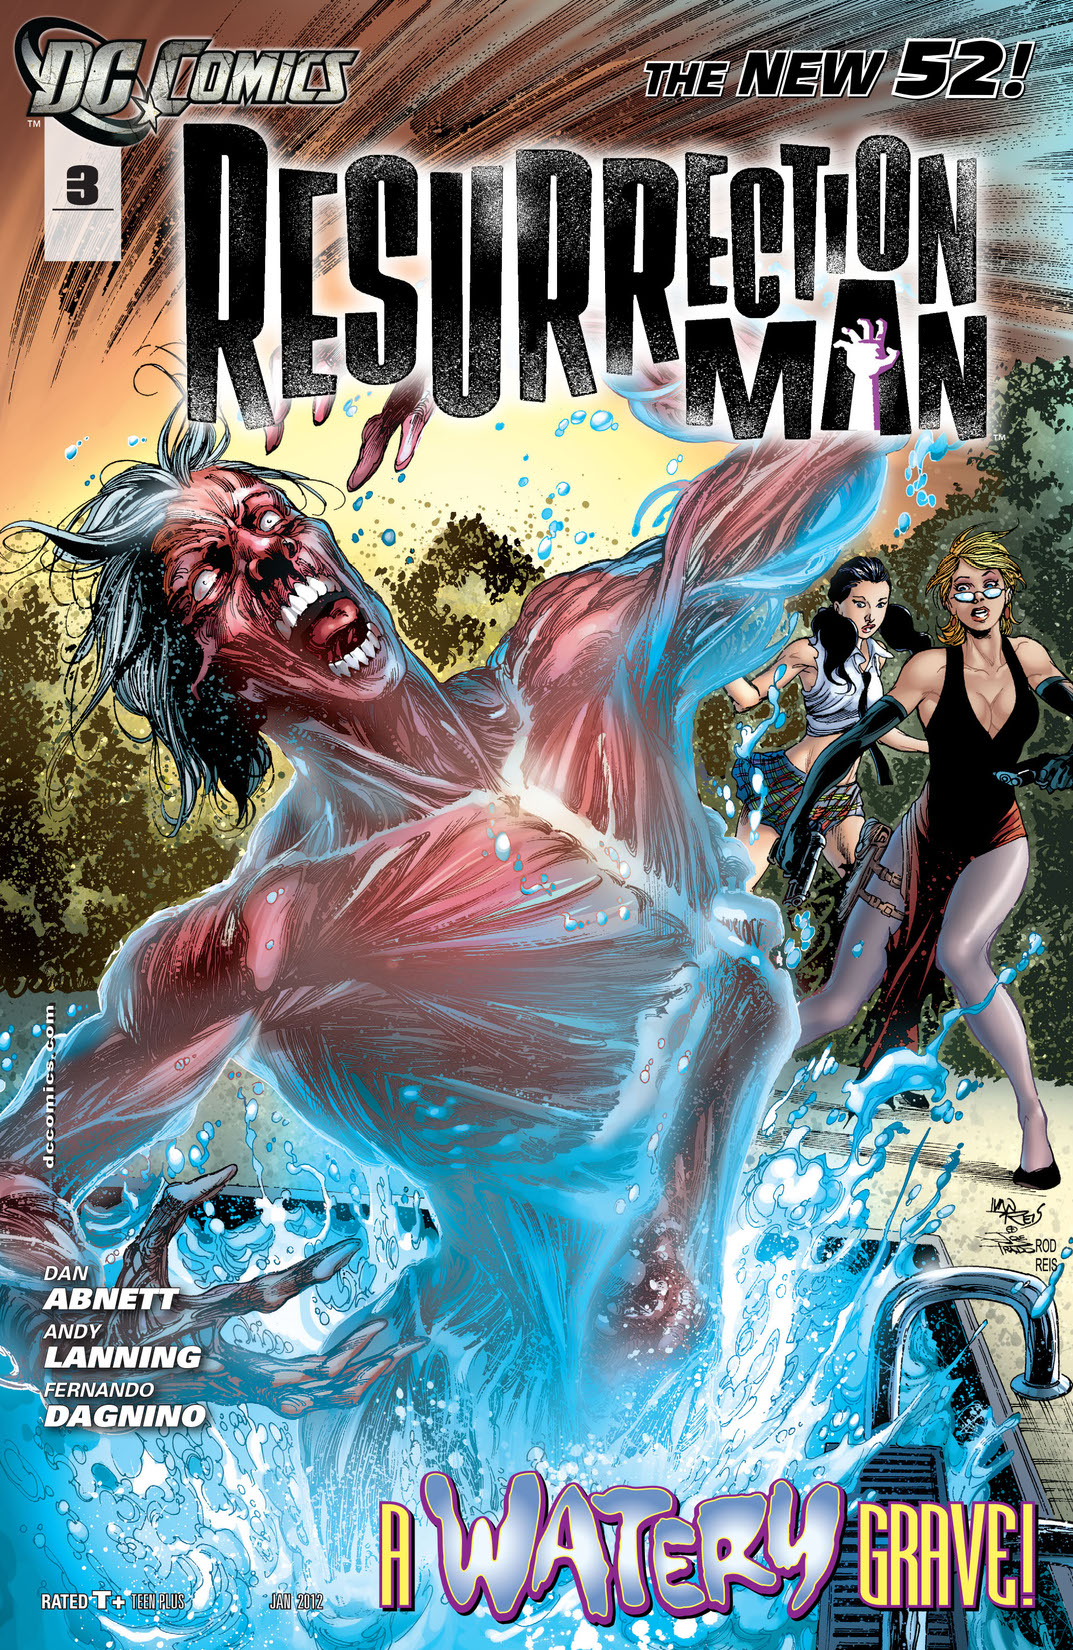 Resurrection Man (2011-) #3 preview images